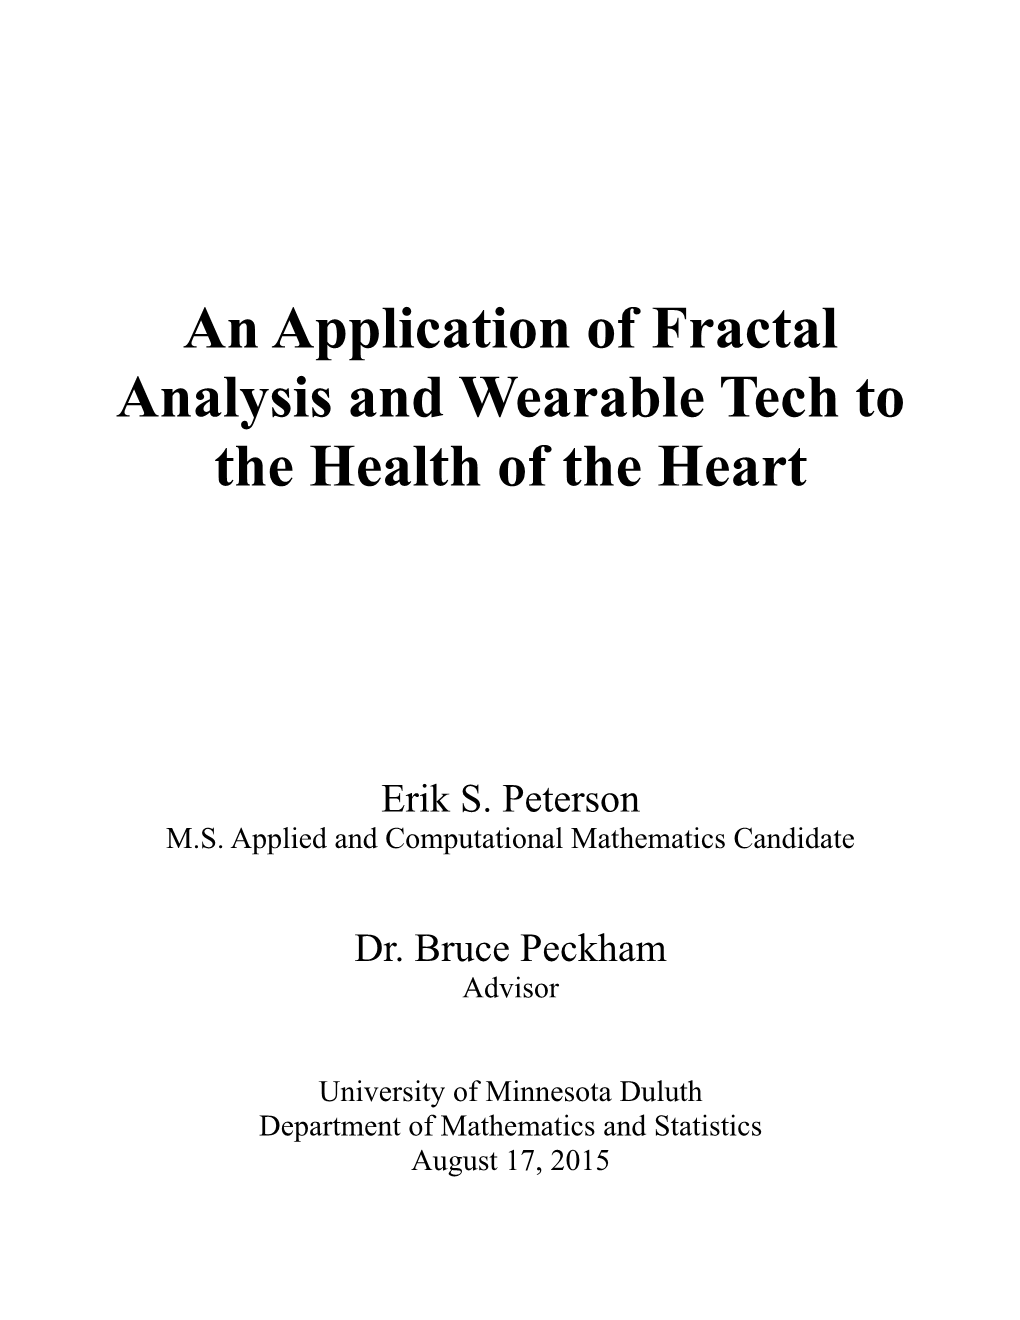 An Application of Fractal Analysis and Wearable Tech to the Health of the Heart